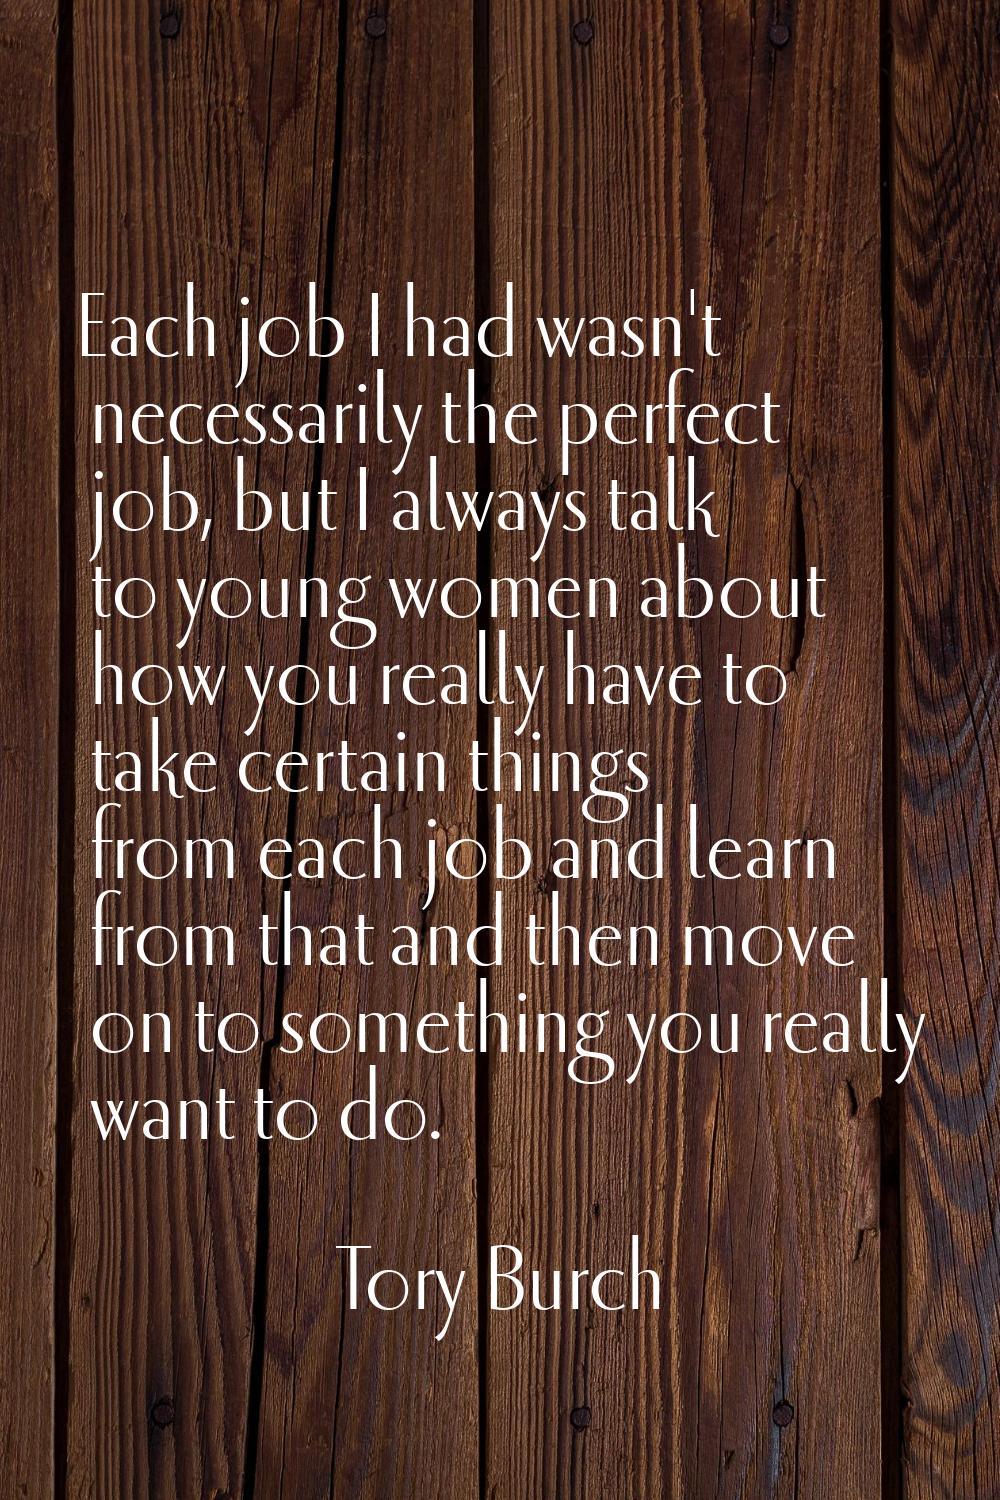 Each job I had wasn't necessarily the perfect job, but I always talk to young women about how you r